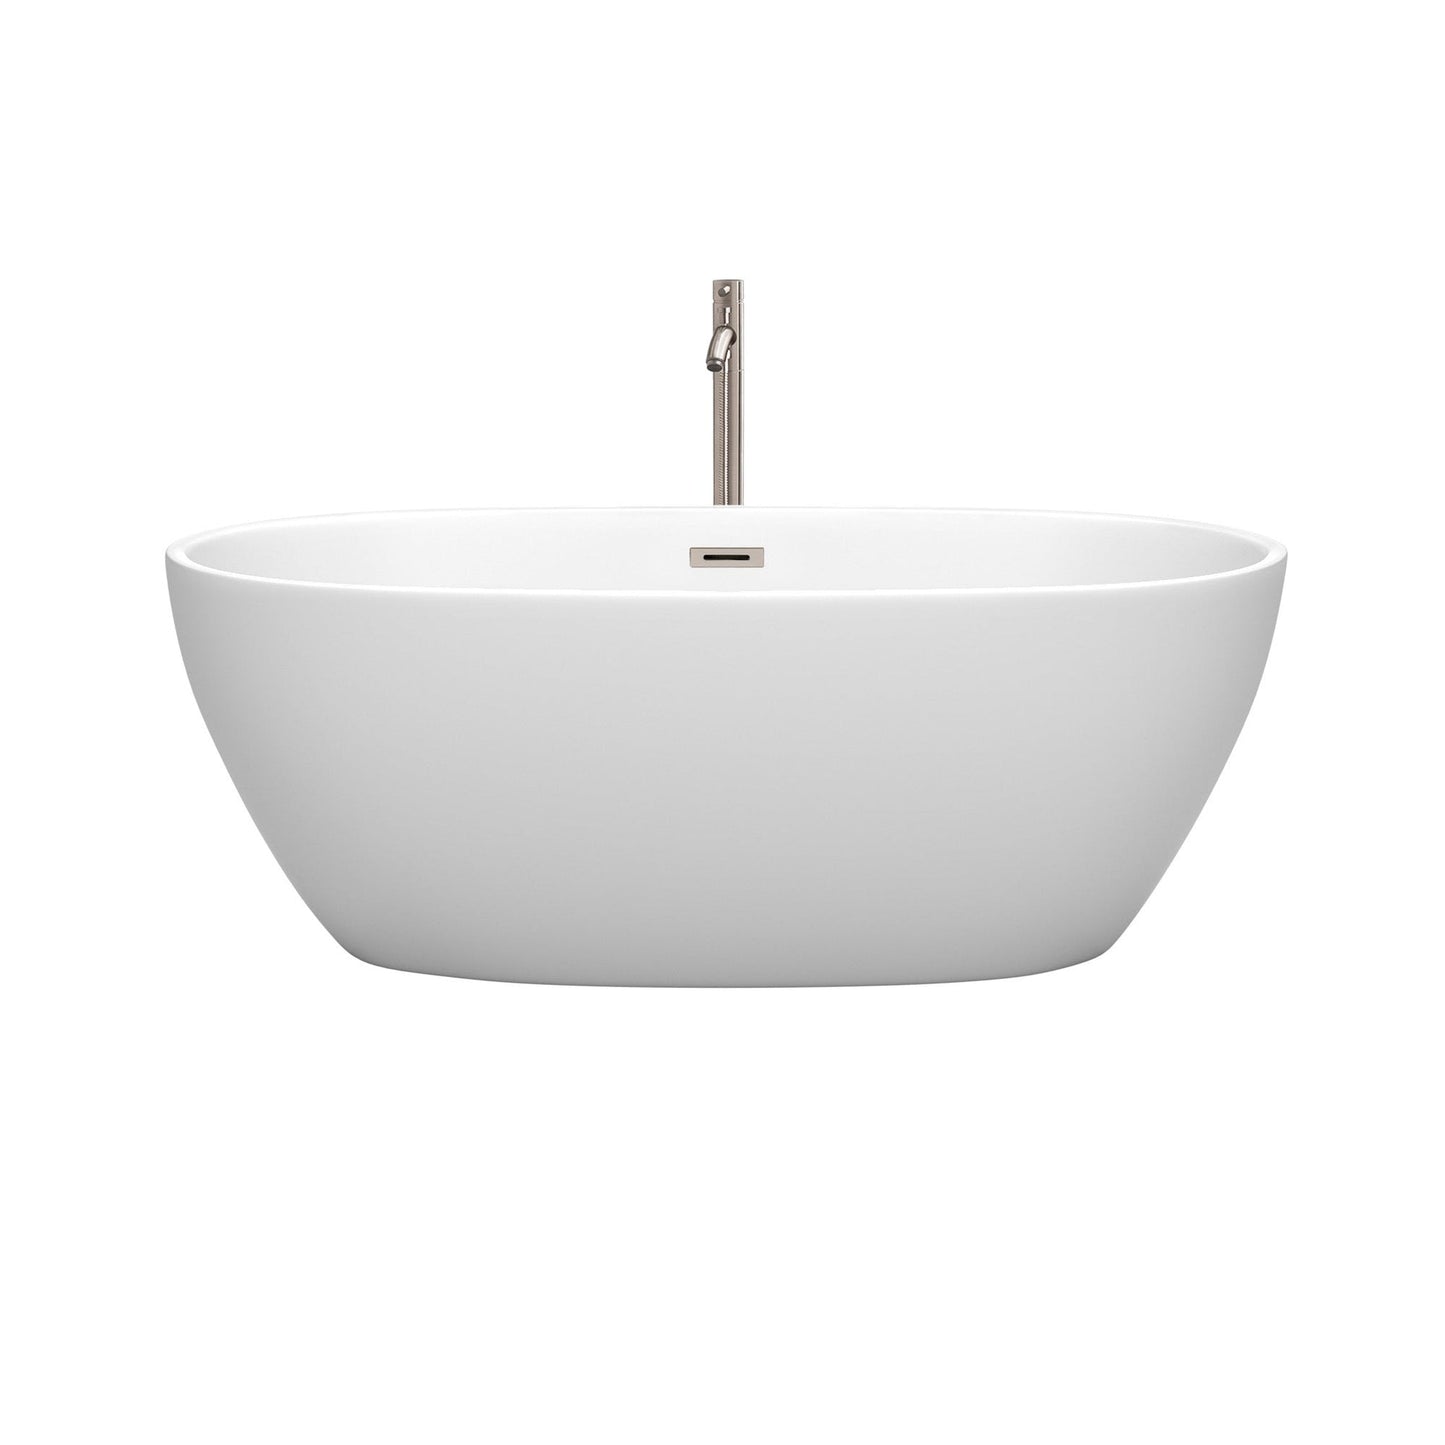 Wyndham Collection Juno 63" Freestanding Bathtub in Matte White With Floor Mounted Faucet, Drain and Overflow Trim in Brushed Nickel